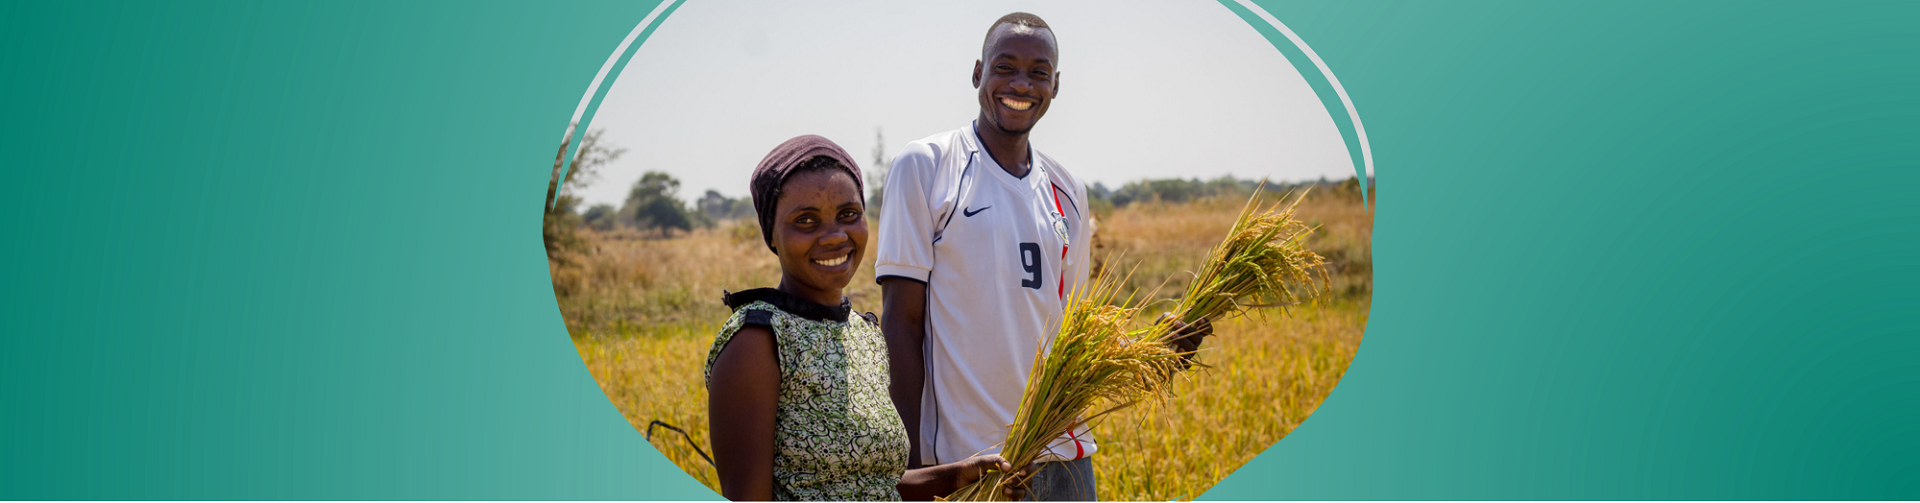 Investing in Farmers: Results and key lessons of the Agriculture Human Capital Investment Study